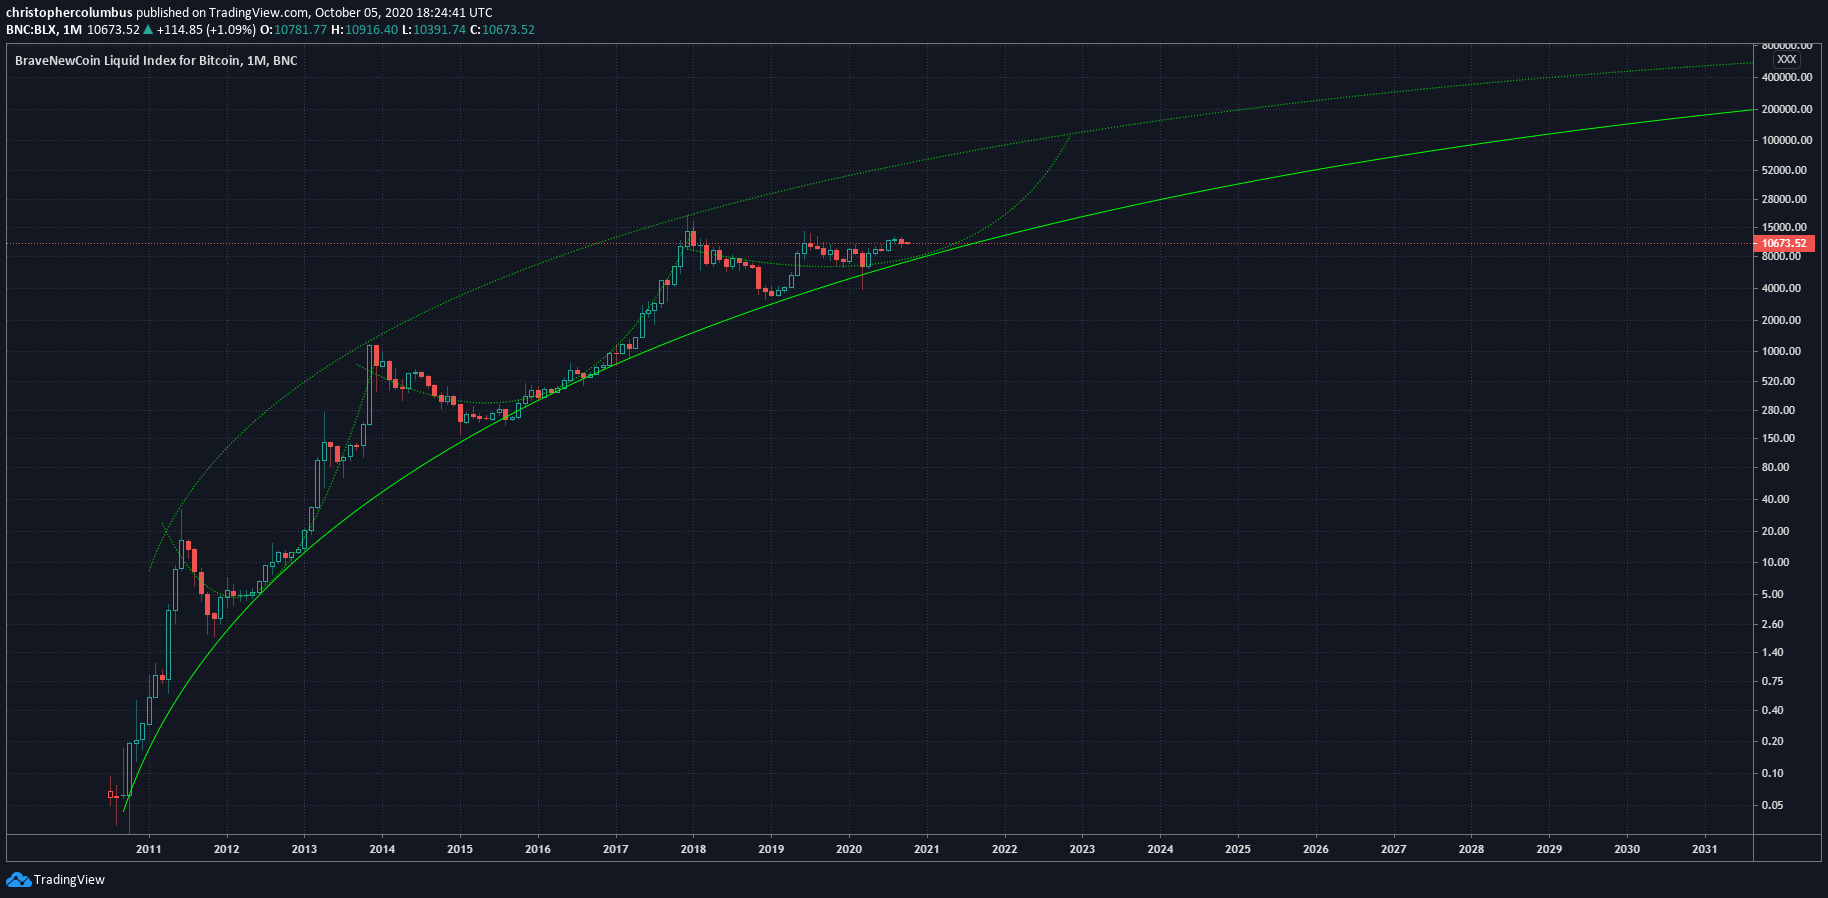 Bitcoin's logarithmic growth curve, as foretold by Dave the Wave